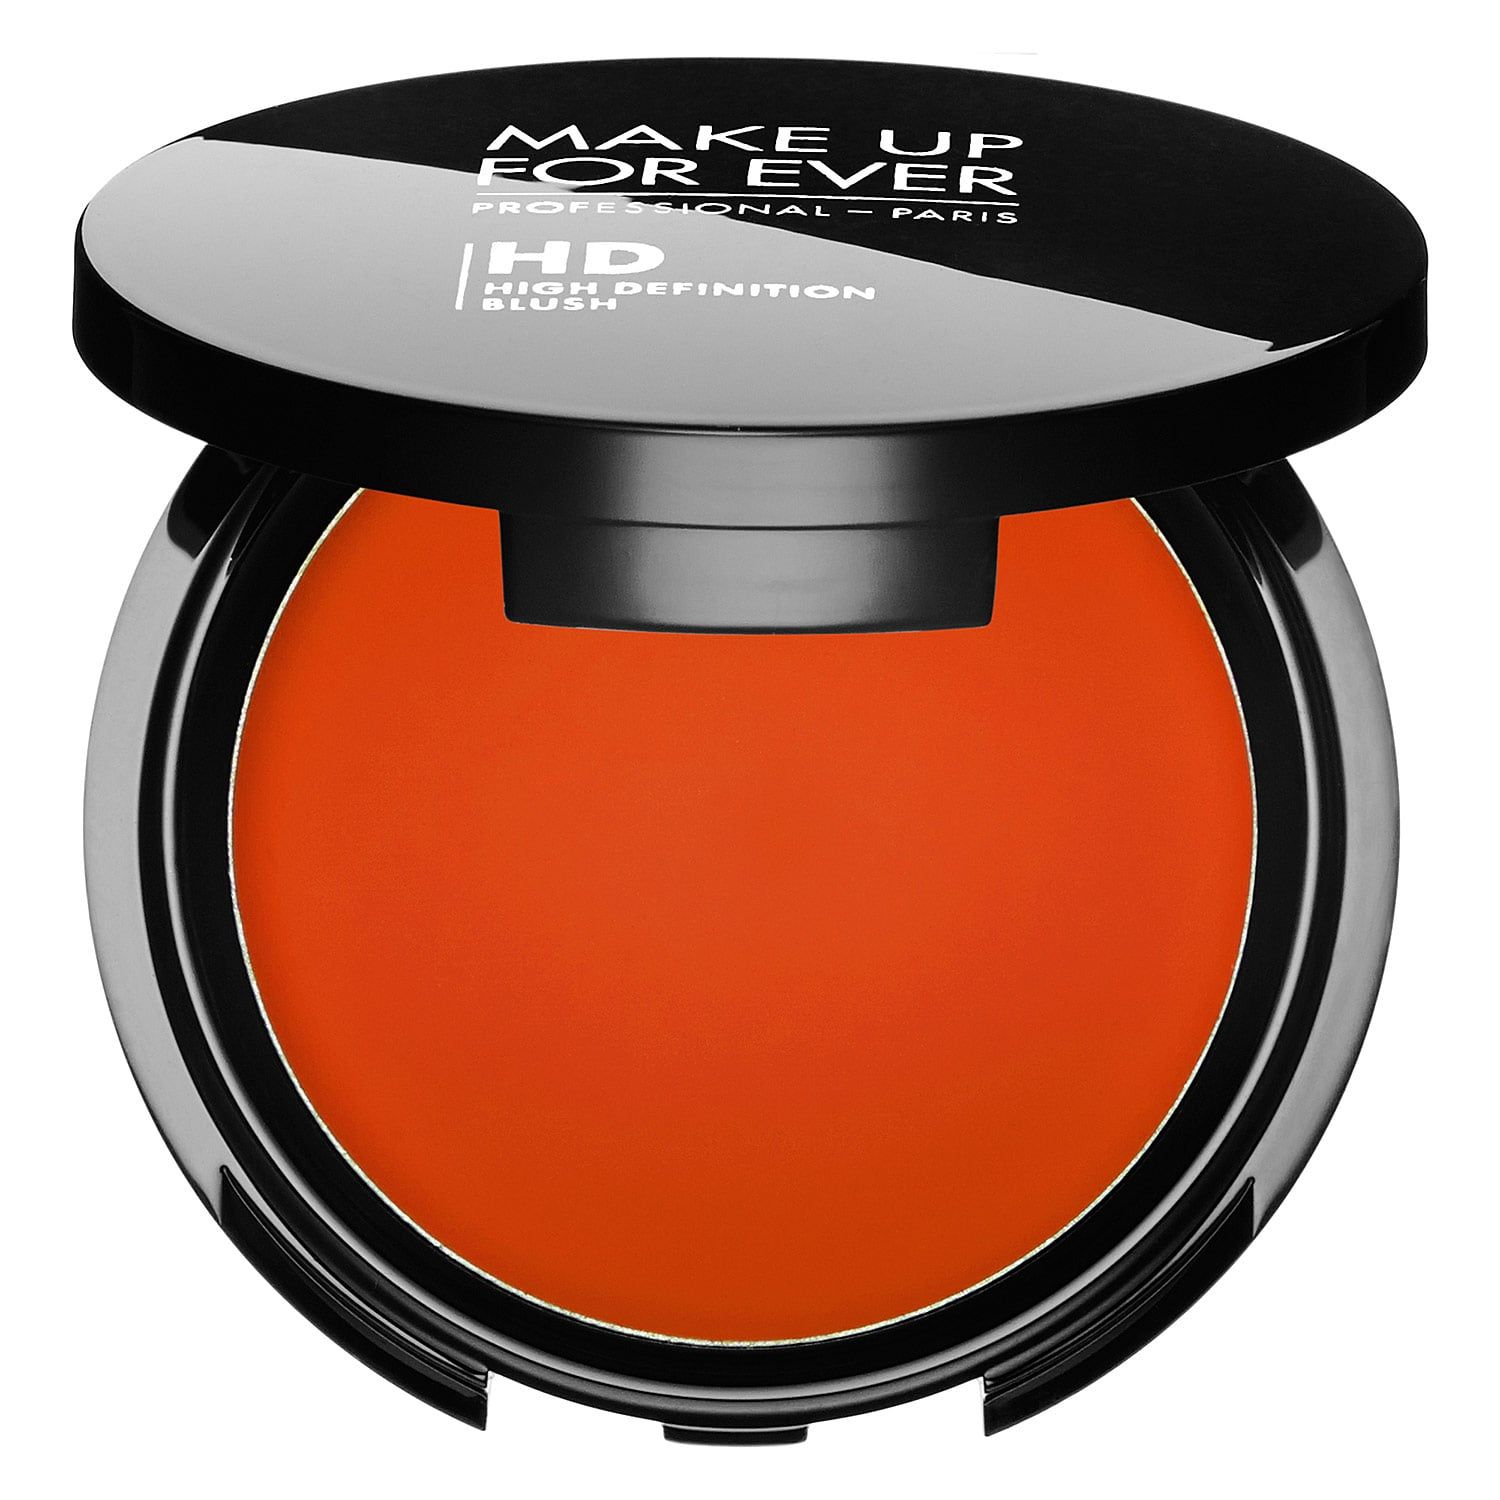 Make Up For Ever HD Blush